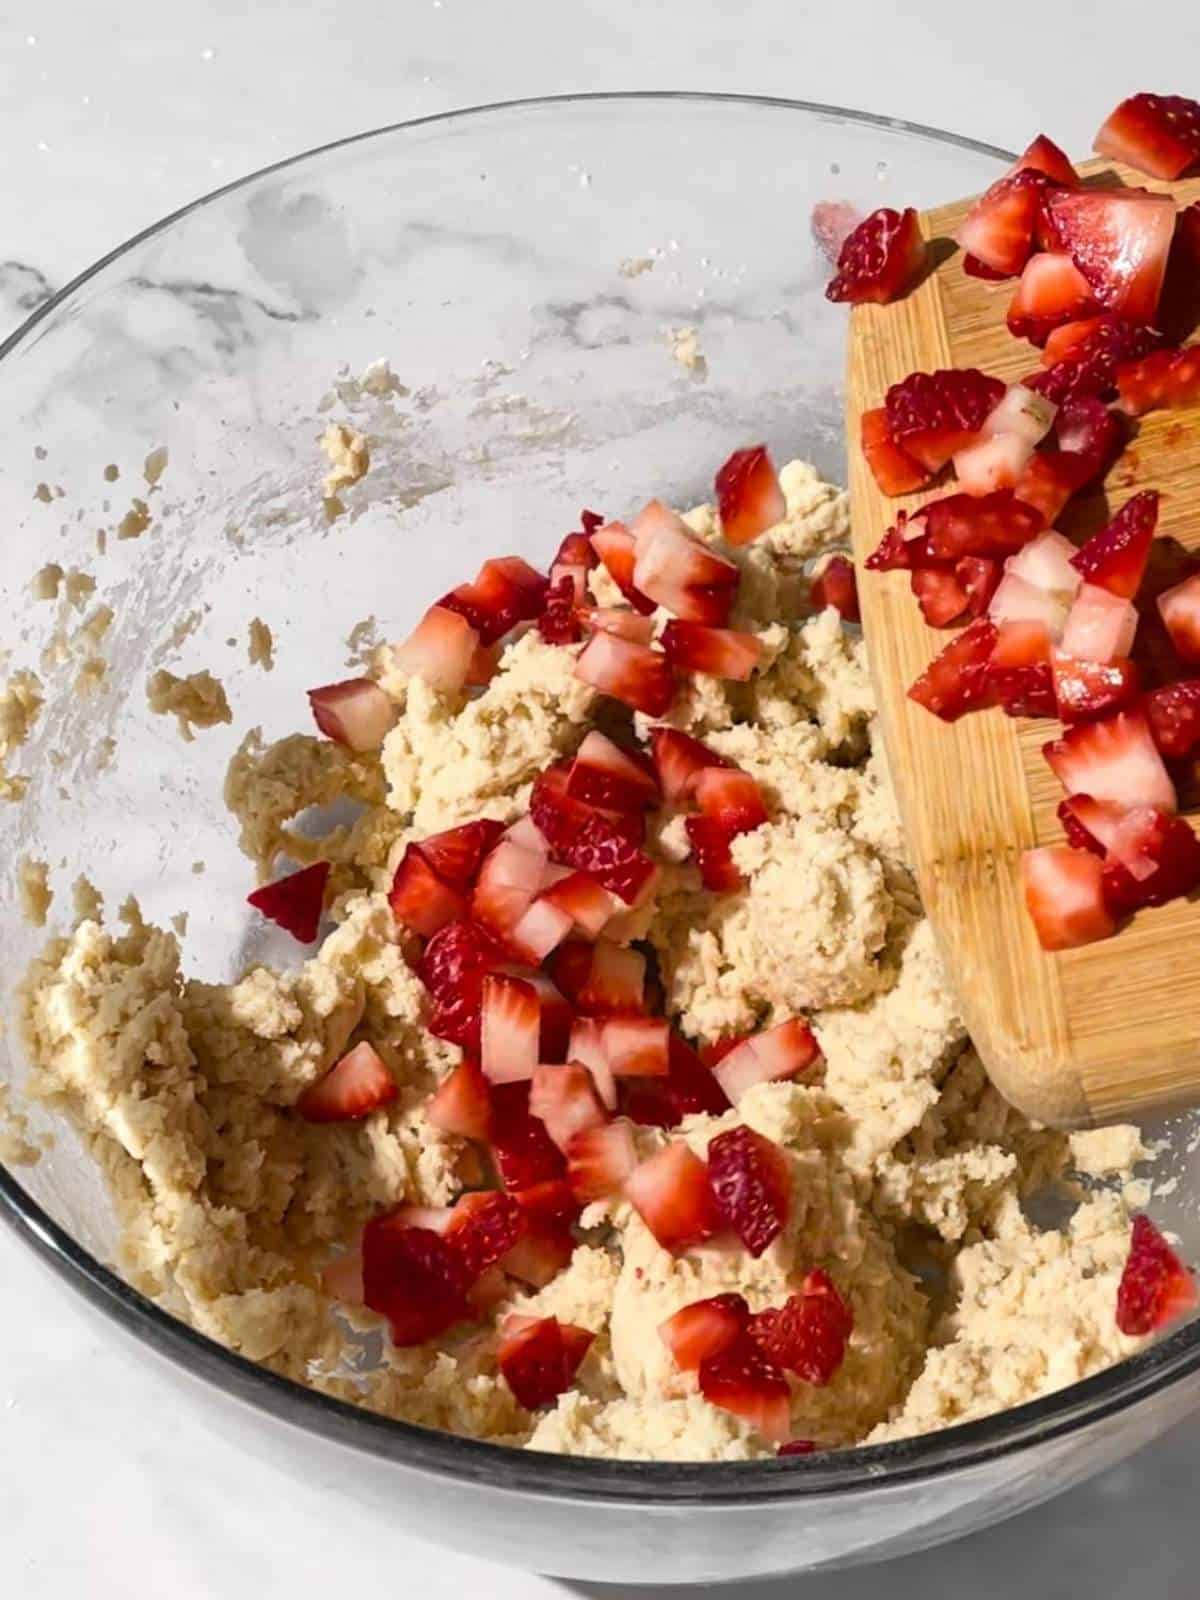 Freshly chopped strawberries are added to a bowl of raw cookie dough.